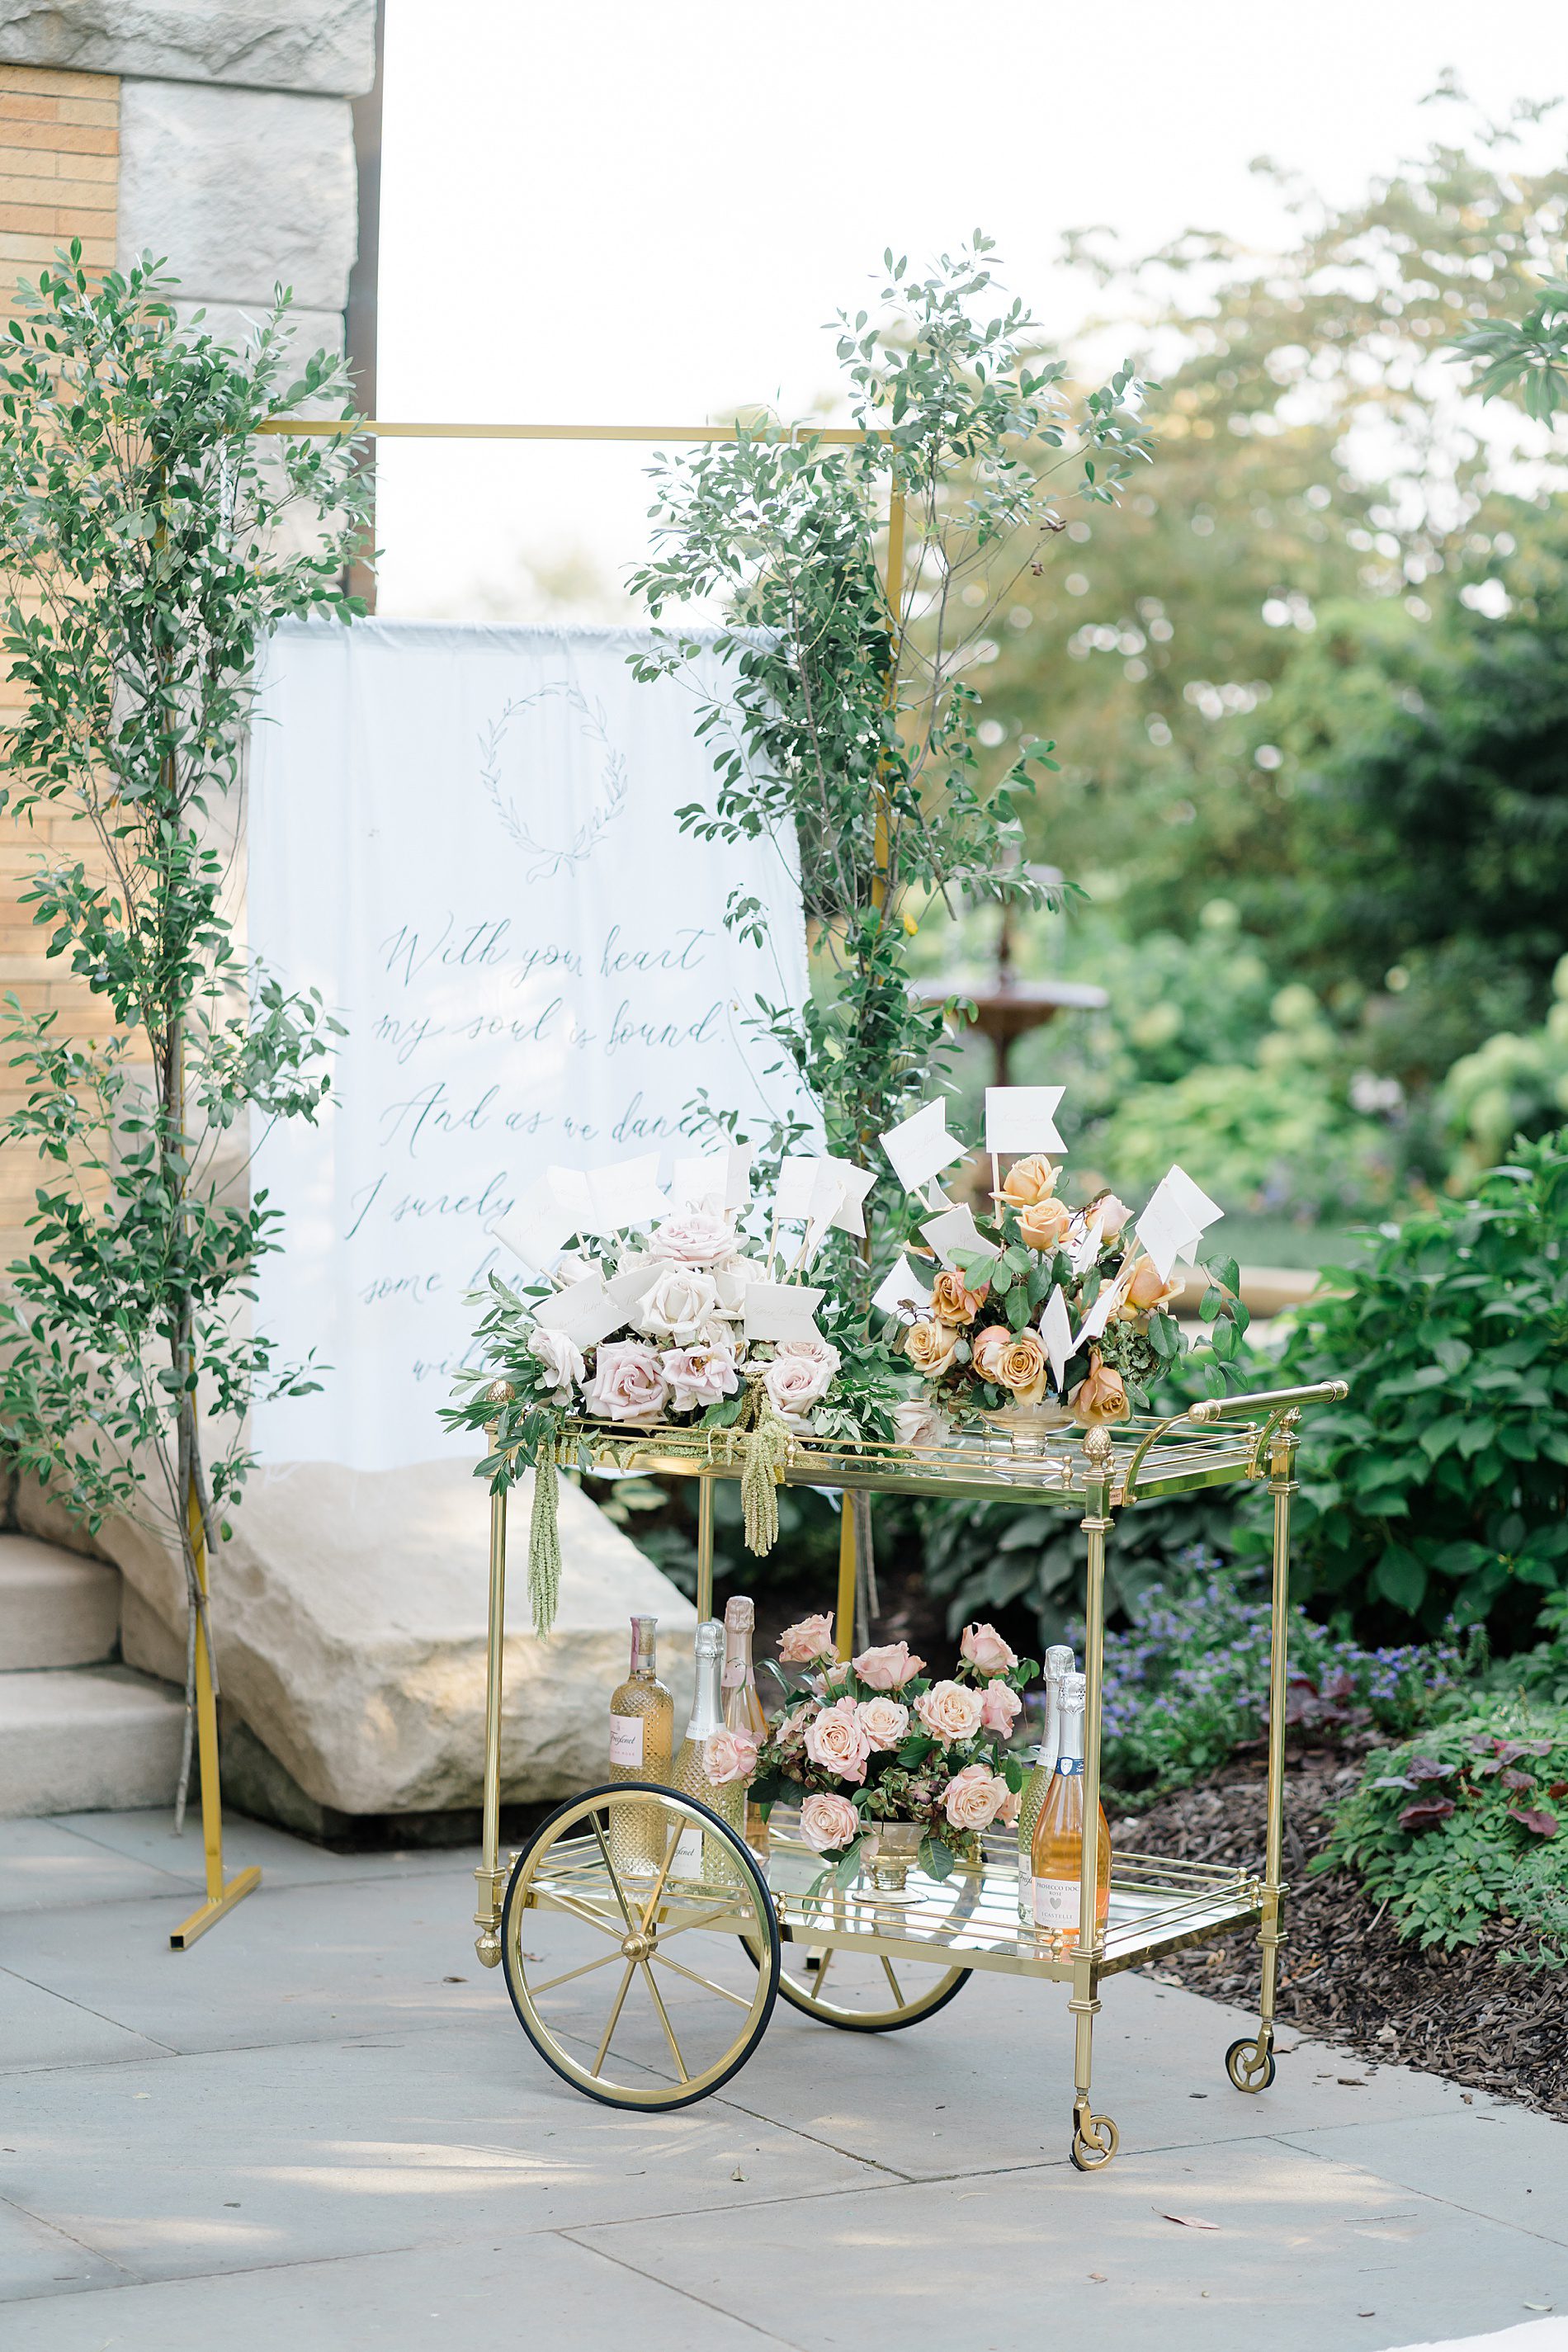 wedding details from Cairnwood Estate Front Shoot | Part One of Styled Shoots Across America